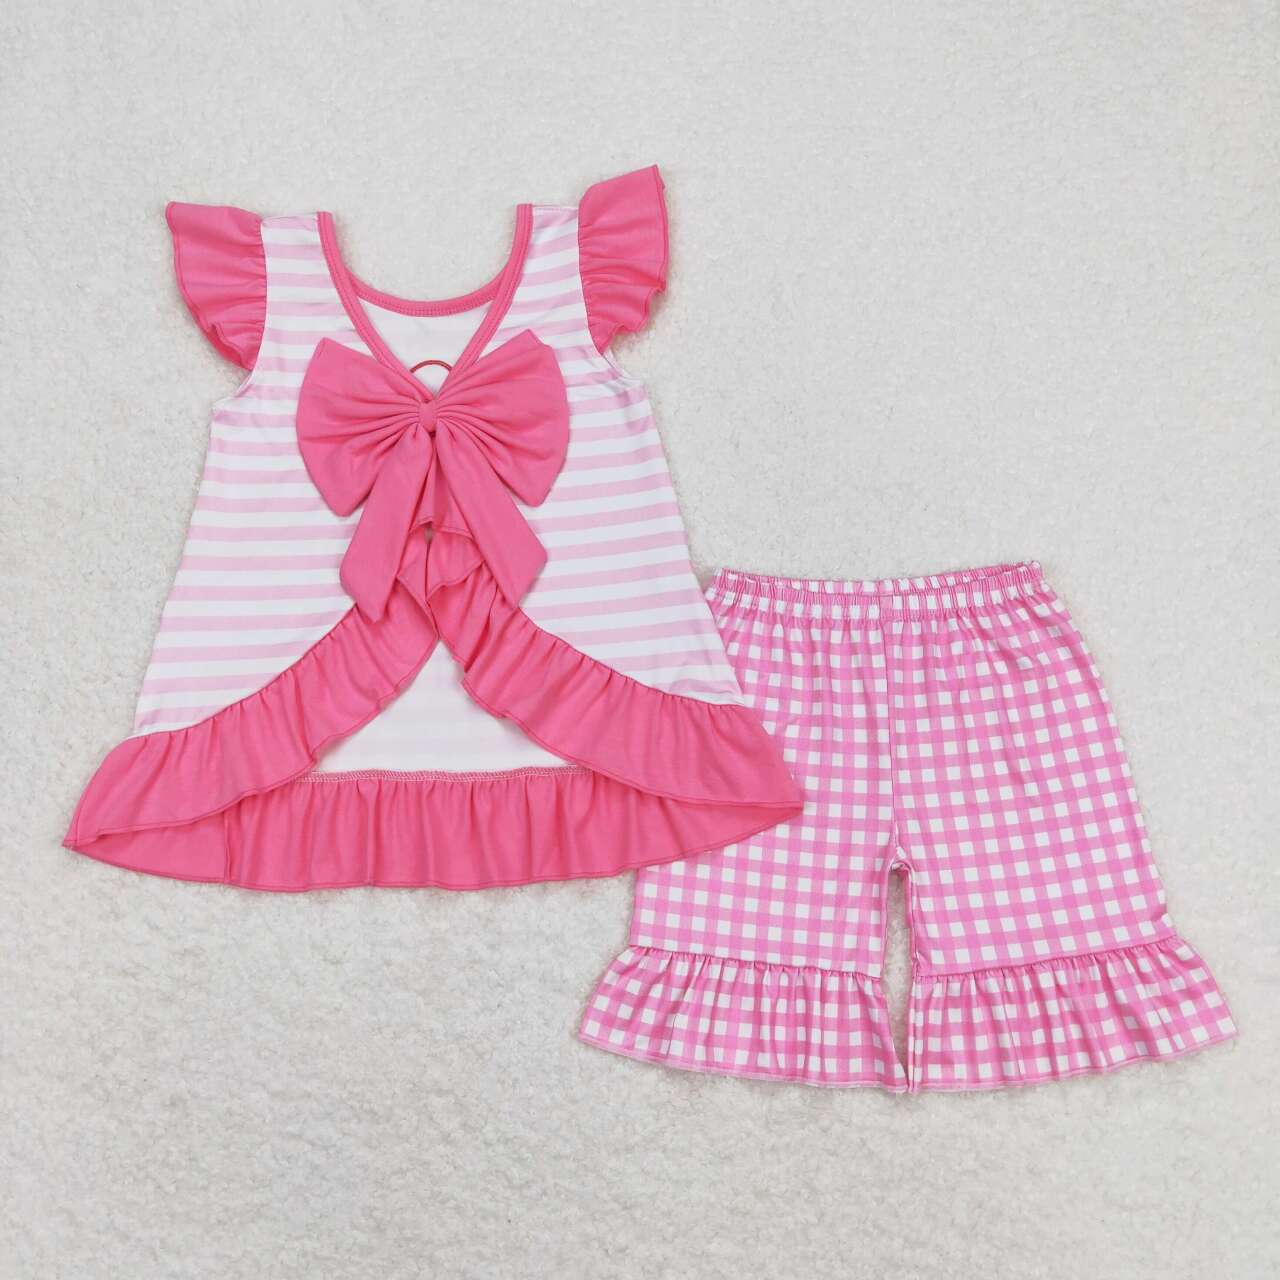 pink i love dad embroidery shorts set